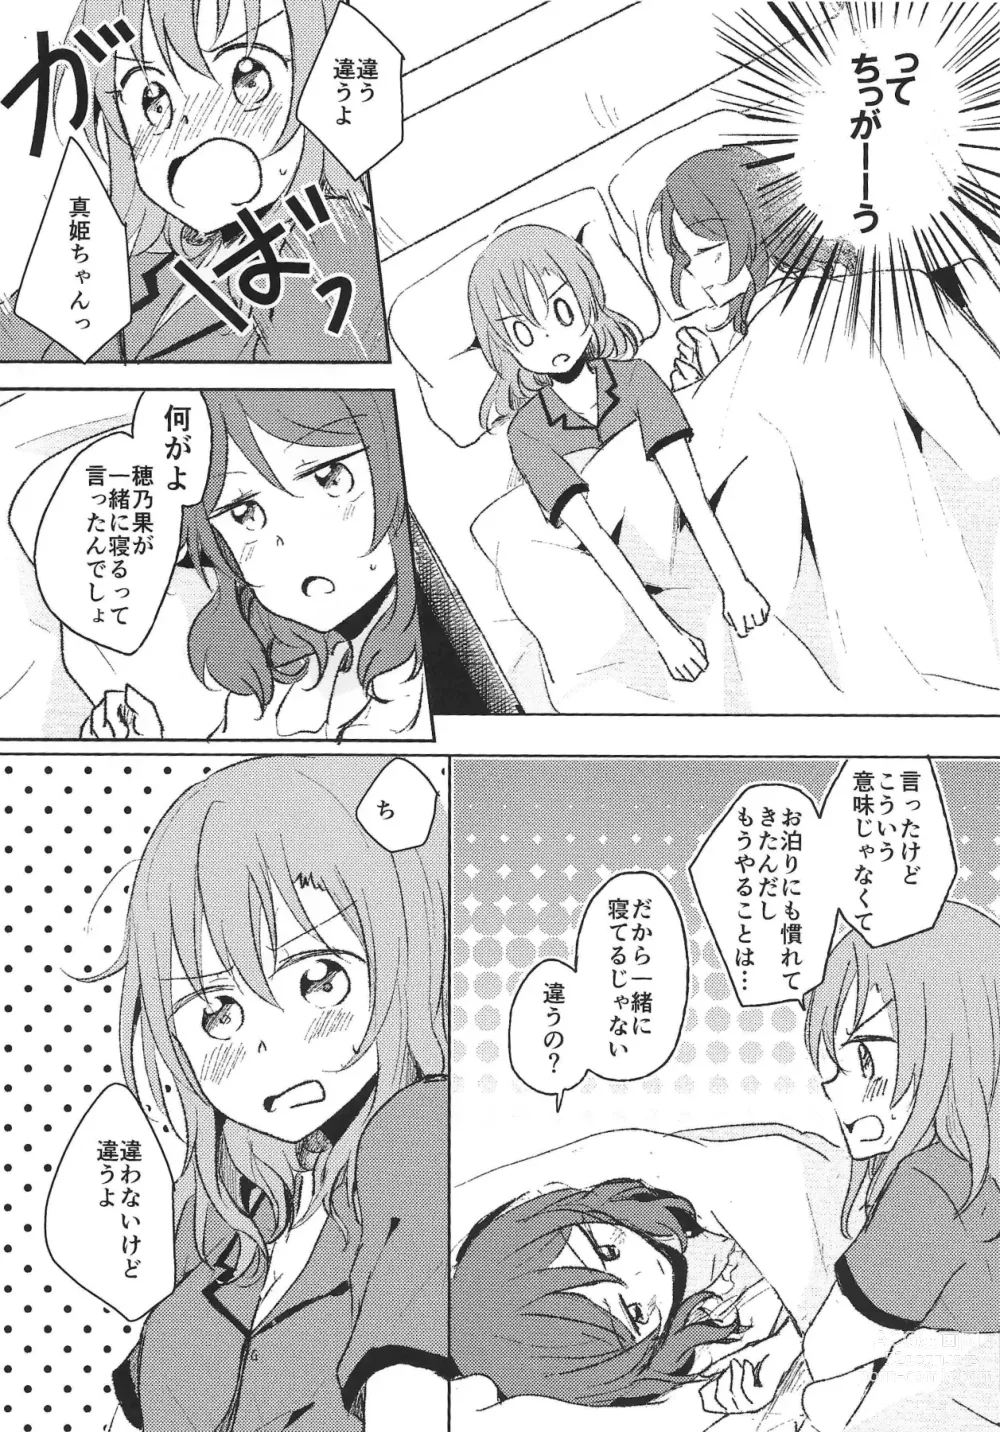 Page 5 of doujinshi LOVE STEP